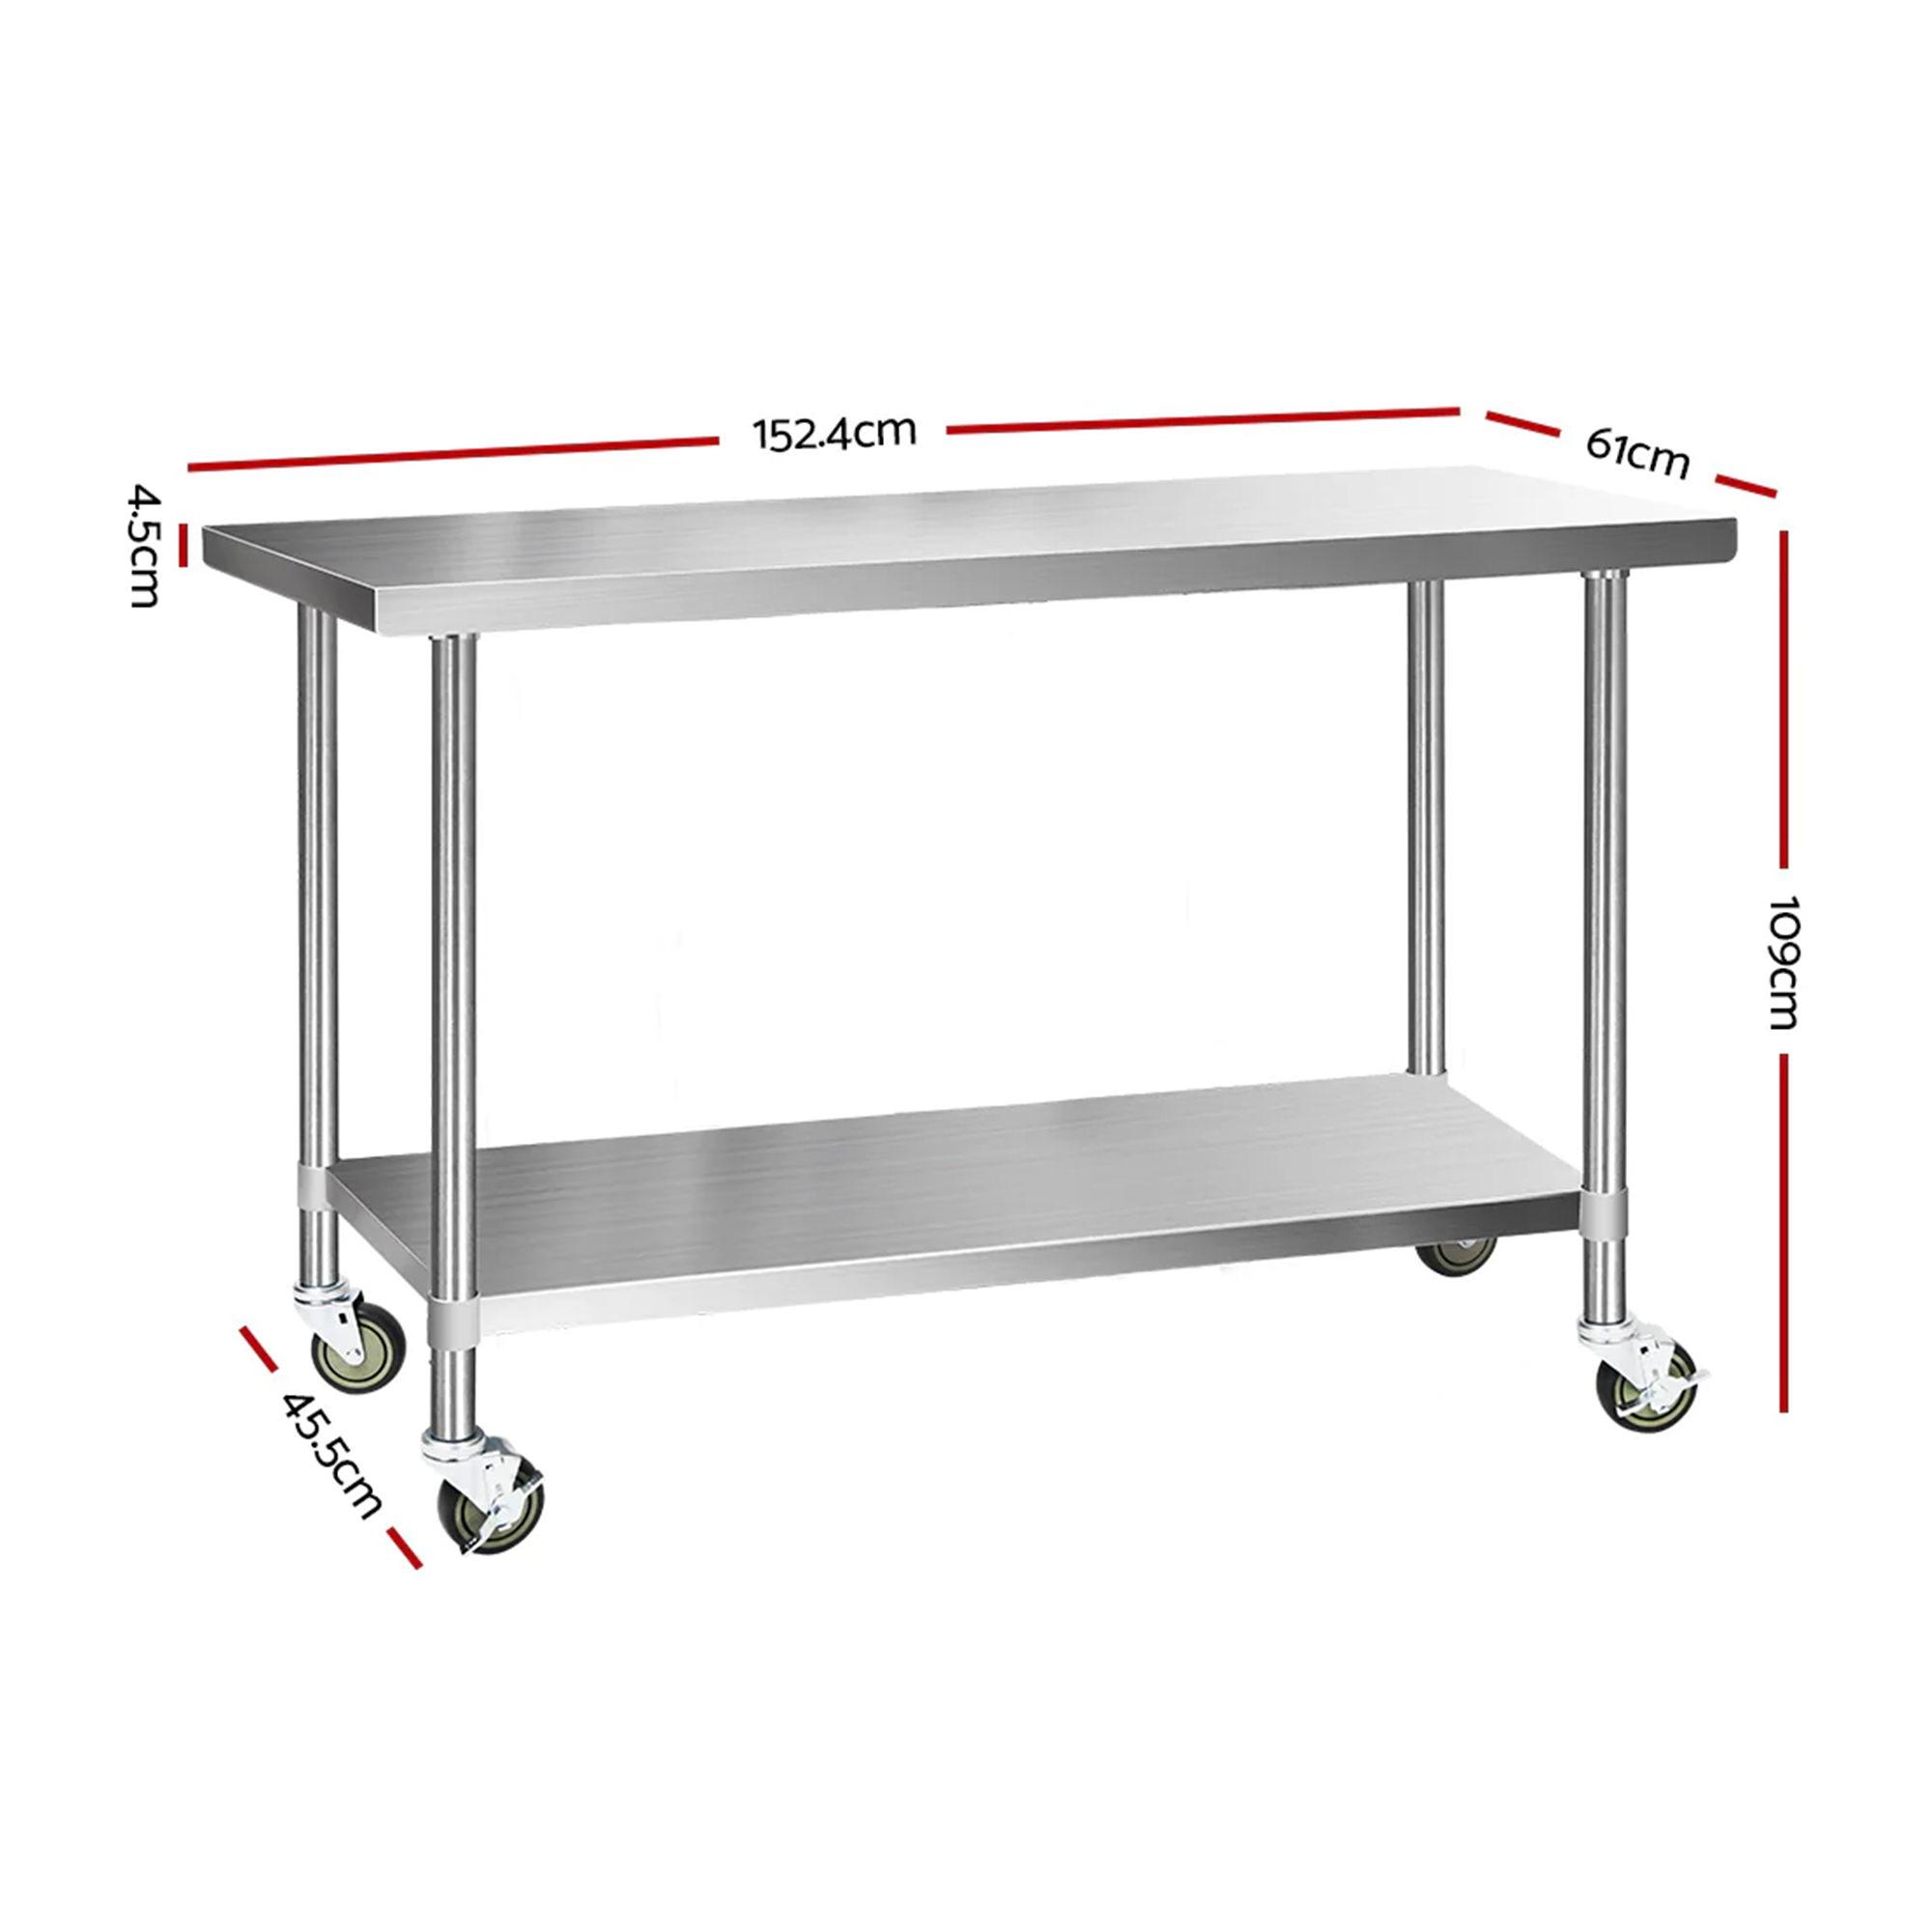 Cefito 304 Stainless Steel Kitchen Bench with Wheels 152.4x61cm Image 3